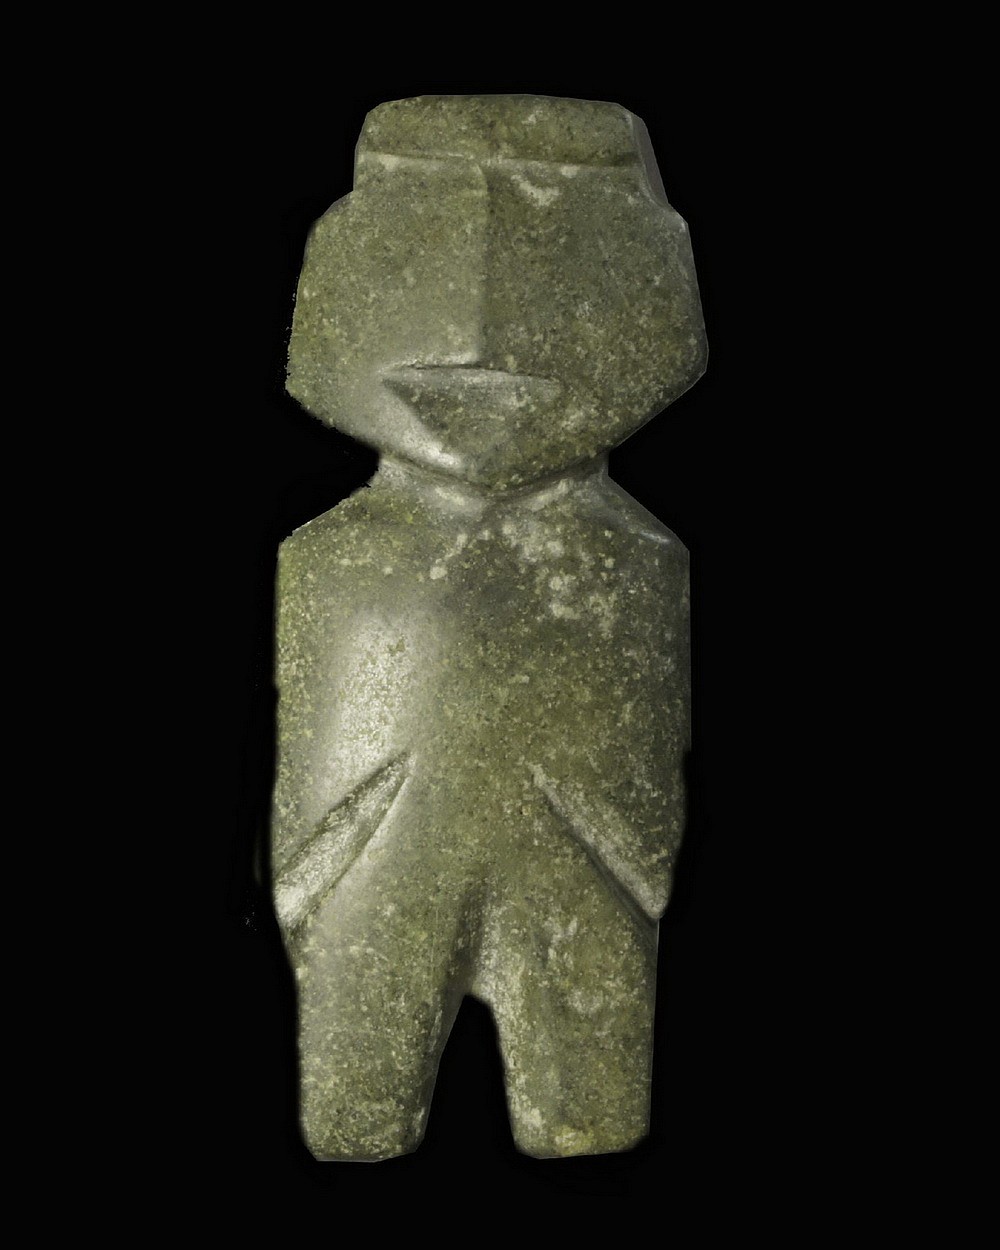 Mexico, Classic Greenish Grey Stone Mezcala Figure of the M8 Type
This solid, hand-held stone figure fits perfectly in the palm of the hand.  The figure was created using the string-sawing technique and is made of a mottled greenish-grey stone with tiny even flecks of blue- black color evenly speckled throughout.  The figure has its arms to the side, represented by carved grooves, which is a classic characteristic of Type M8 Mezcalas.  The representation of human figures played an important role in Mezcala culture, including in rituals and burial sites.  However, most of these figures, were used for utilitarian purposes as celts or chisels. For a reference see the Primitive Museum of Art's MEZCALA STONE SCULPTURE: THE HUMAN FIGURE, p.22-23, and MEZCALA: ANCIENT STONE SCULPTURE FROM GUERRERO MEXICO, by Carlo Gay and Frances Pratt, plate 67.  Ex. Gallery Hana-Tokyo, prior to 1970.
Media: Stone
Dimensions: H: 5 in. x W: 2 in.
$6,000
n5055